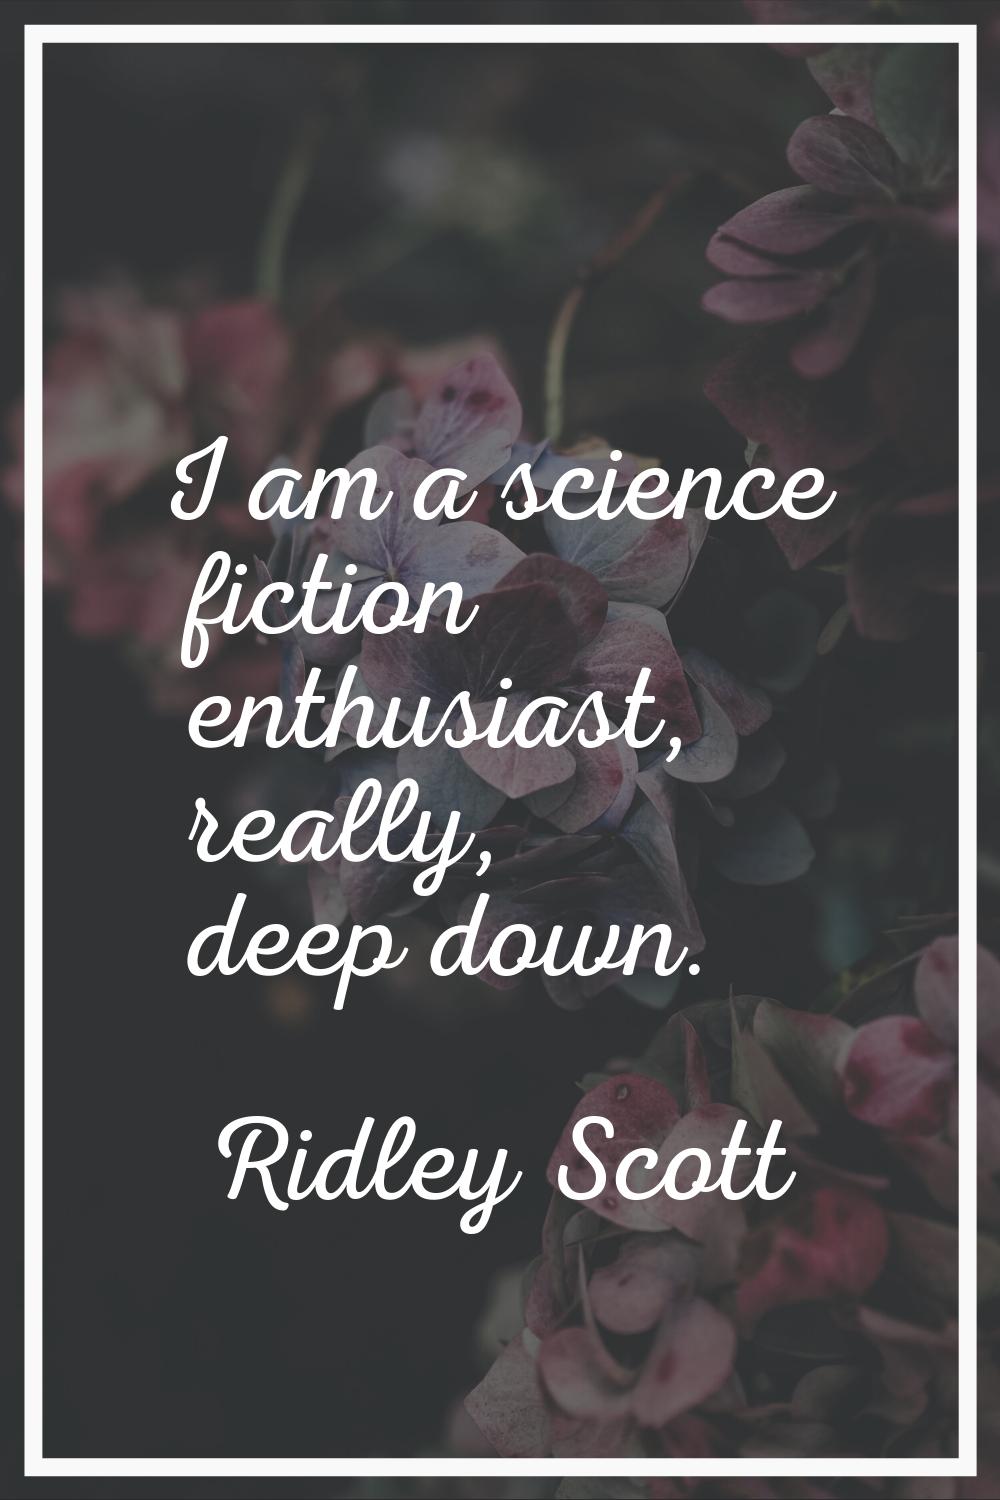 I am a science fiction enthusiast, really, deep down.